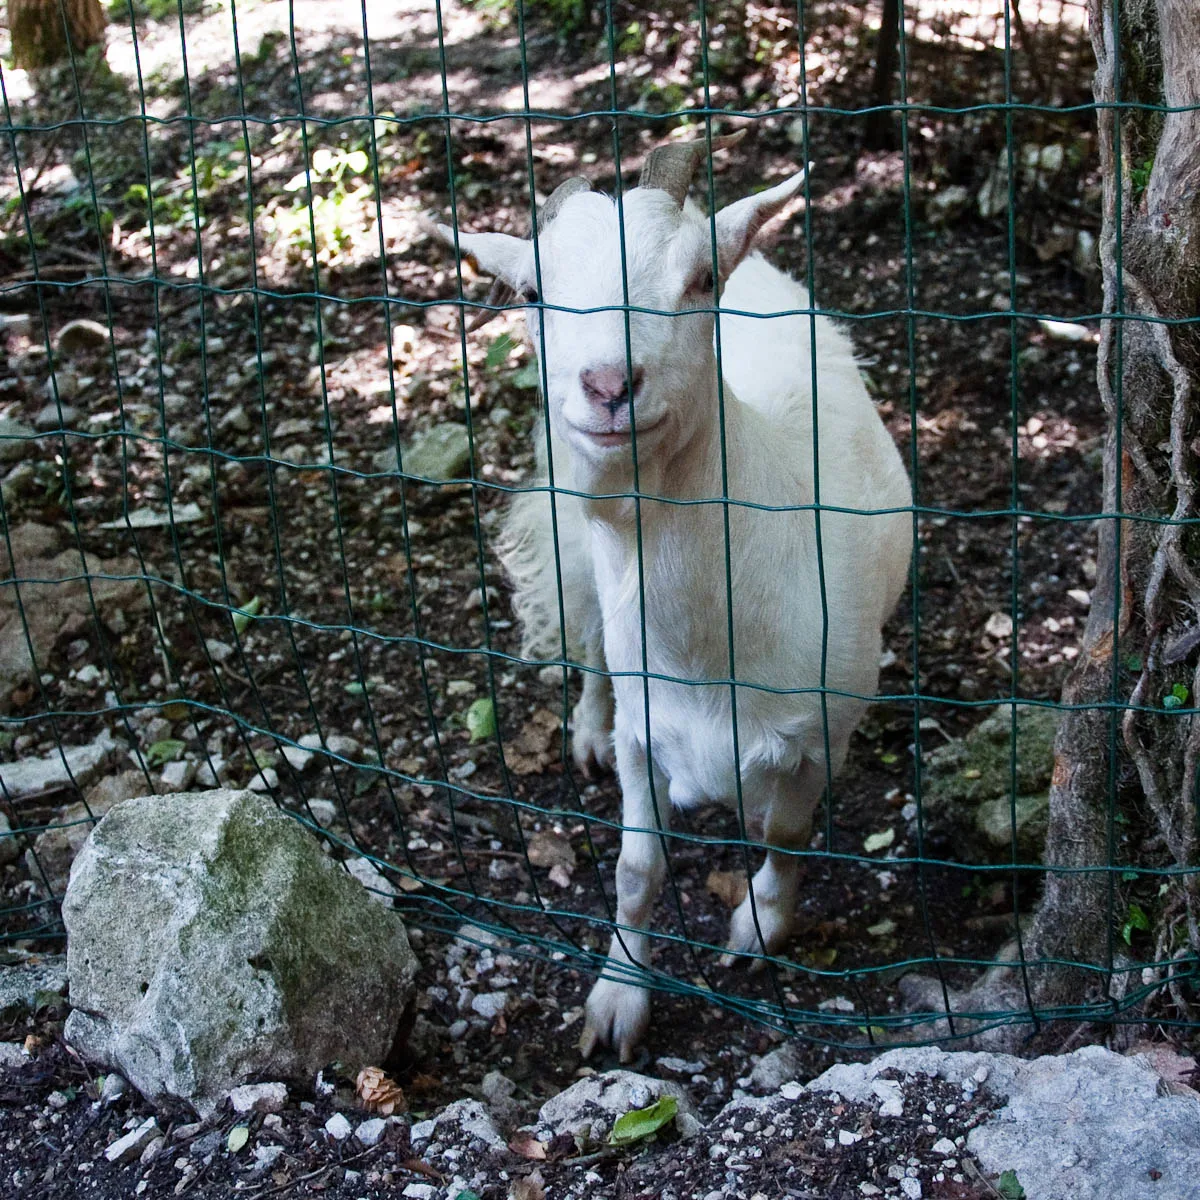 A white goat, Parco delle Cascate, Province of Verona, Italy - www.rossiwrites.com